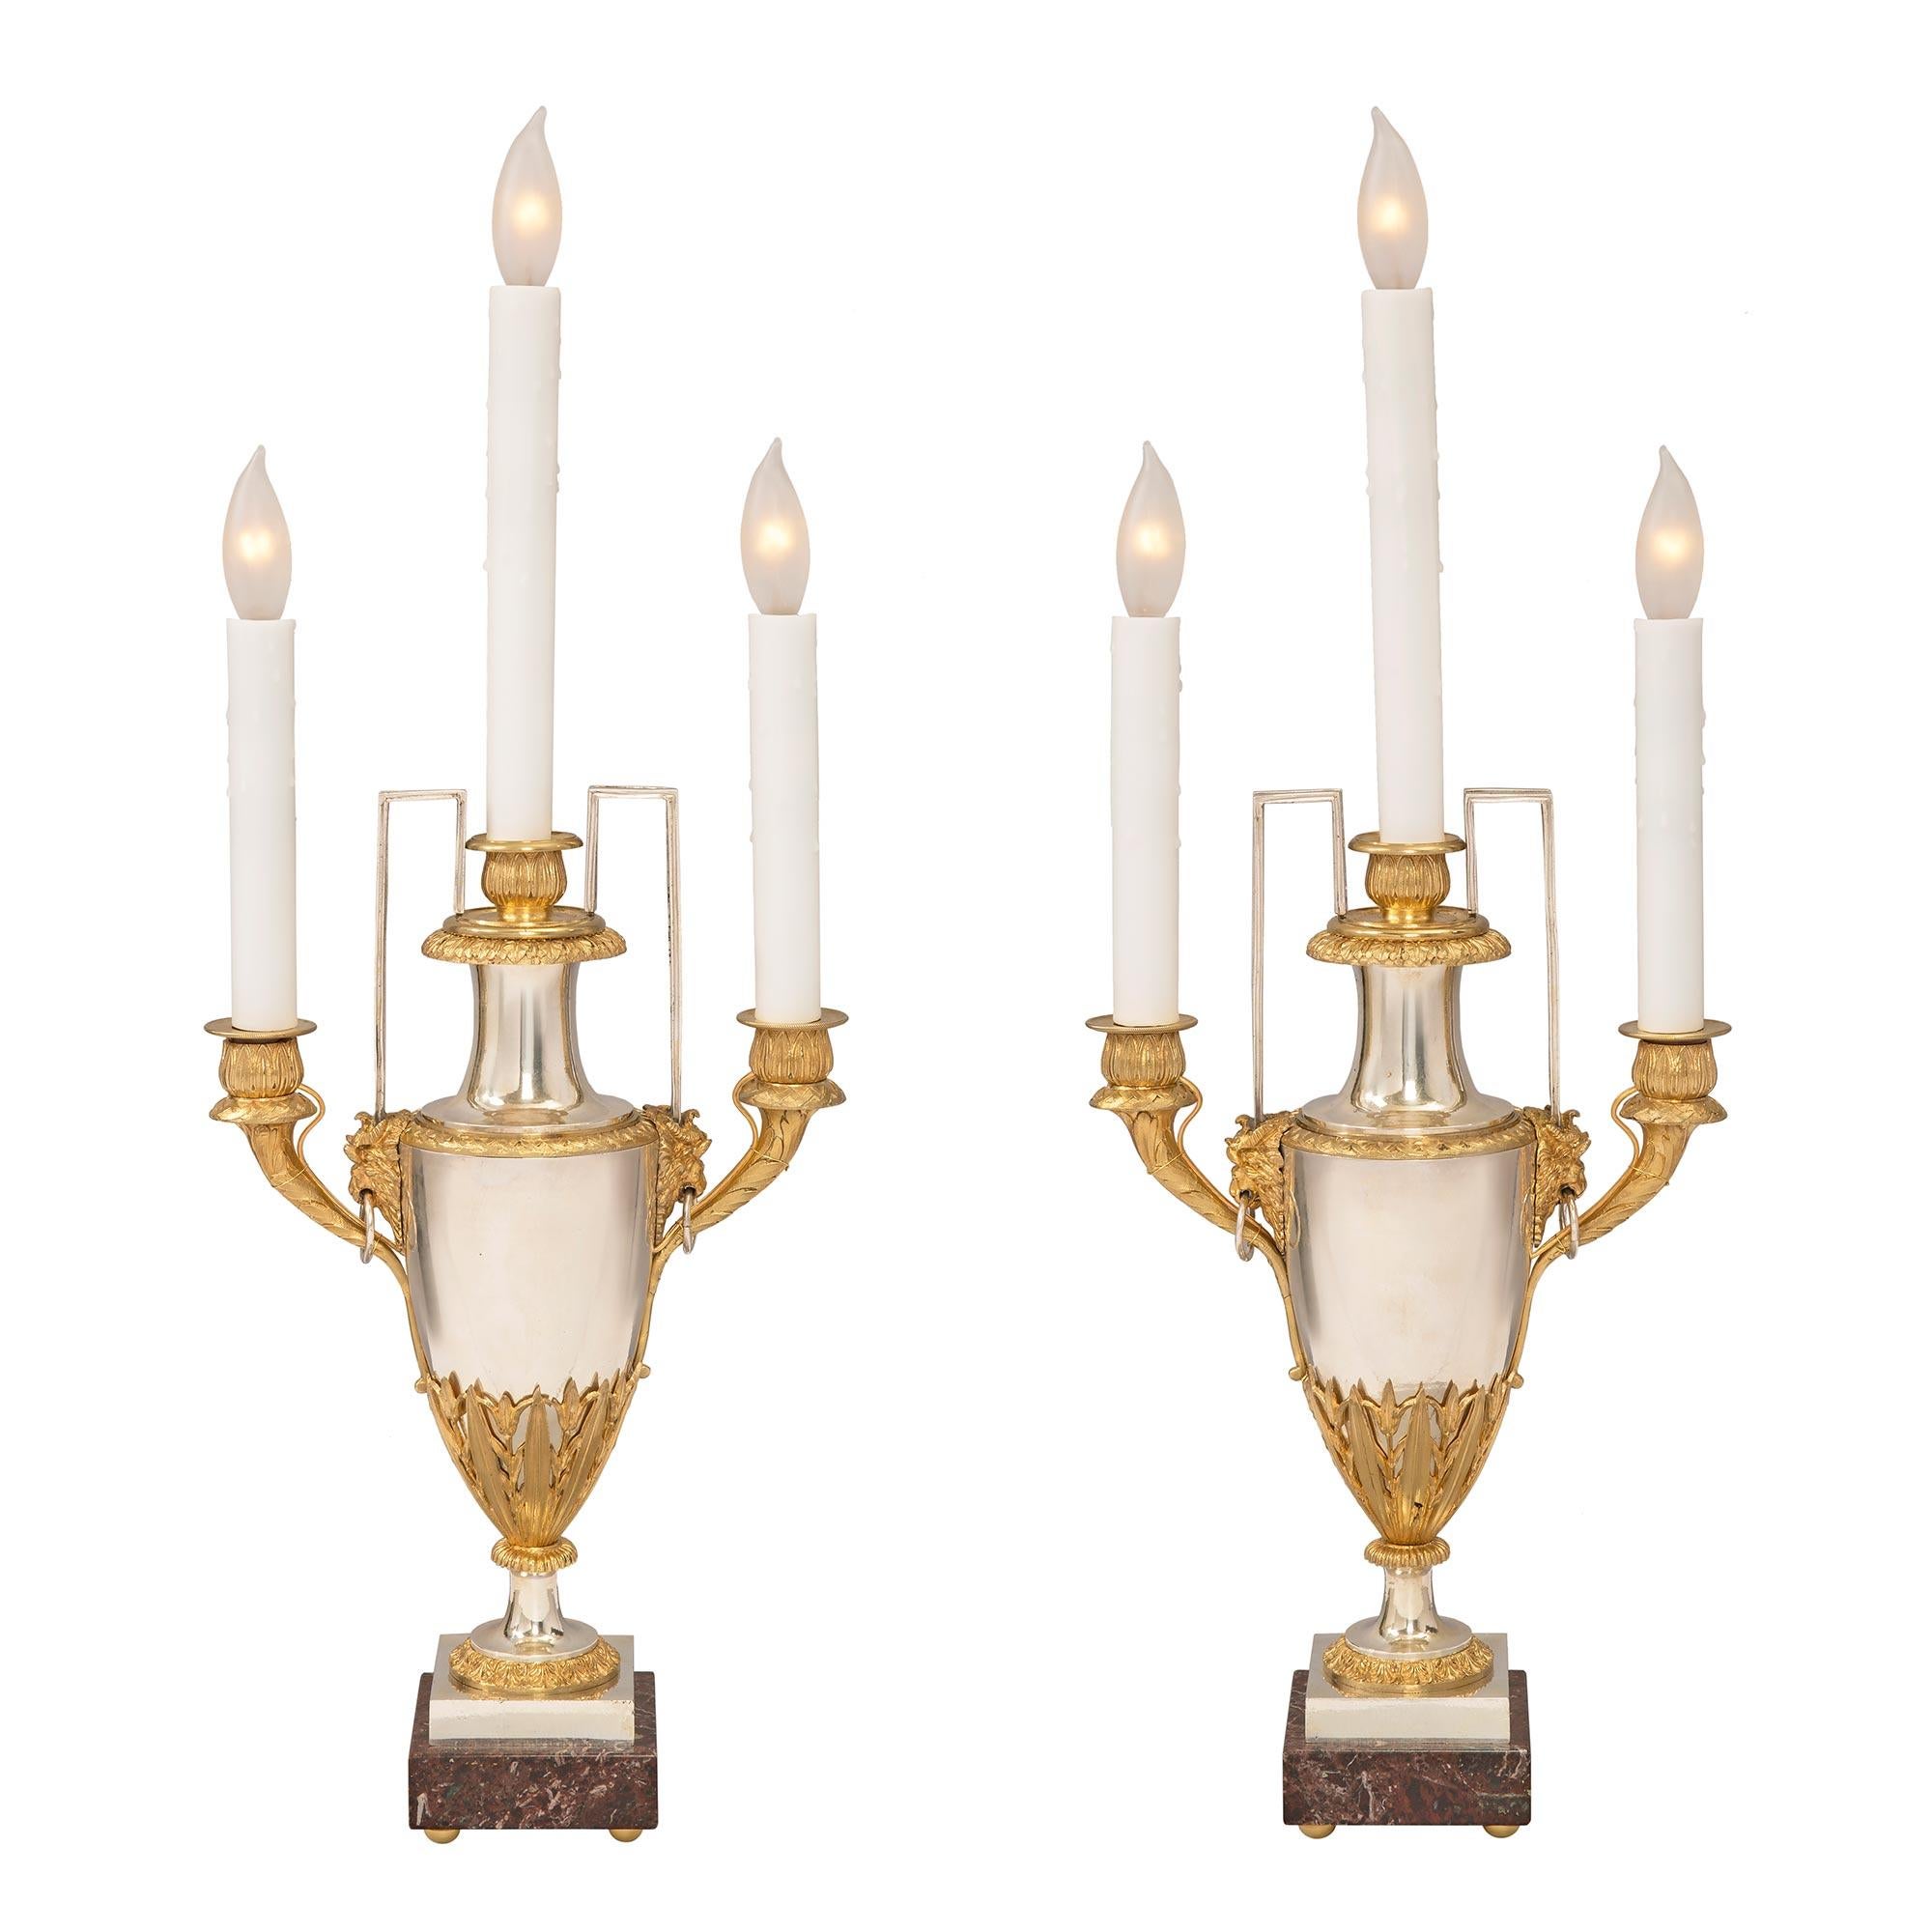 A most elegant pair of French 19th century Louis XVI st. silvered bronze, ormolu and marble three arm candelabra lamps. Each lamp is raised by fine ormolu ball feet below a rectangular marble base. The ormolu socle pedestal displays a beautiful